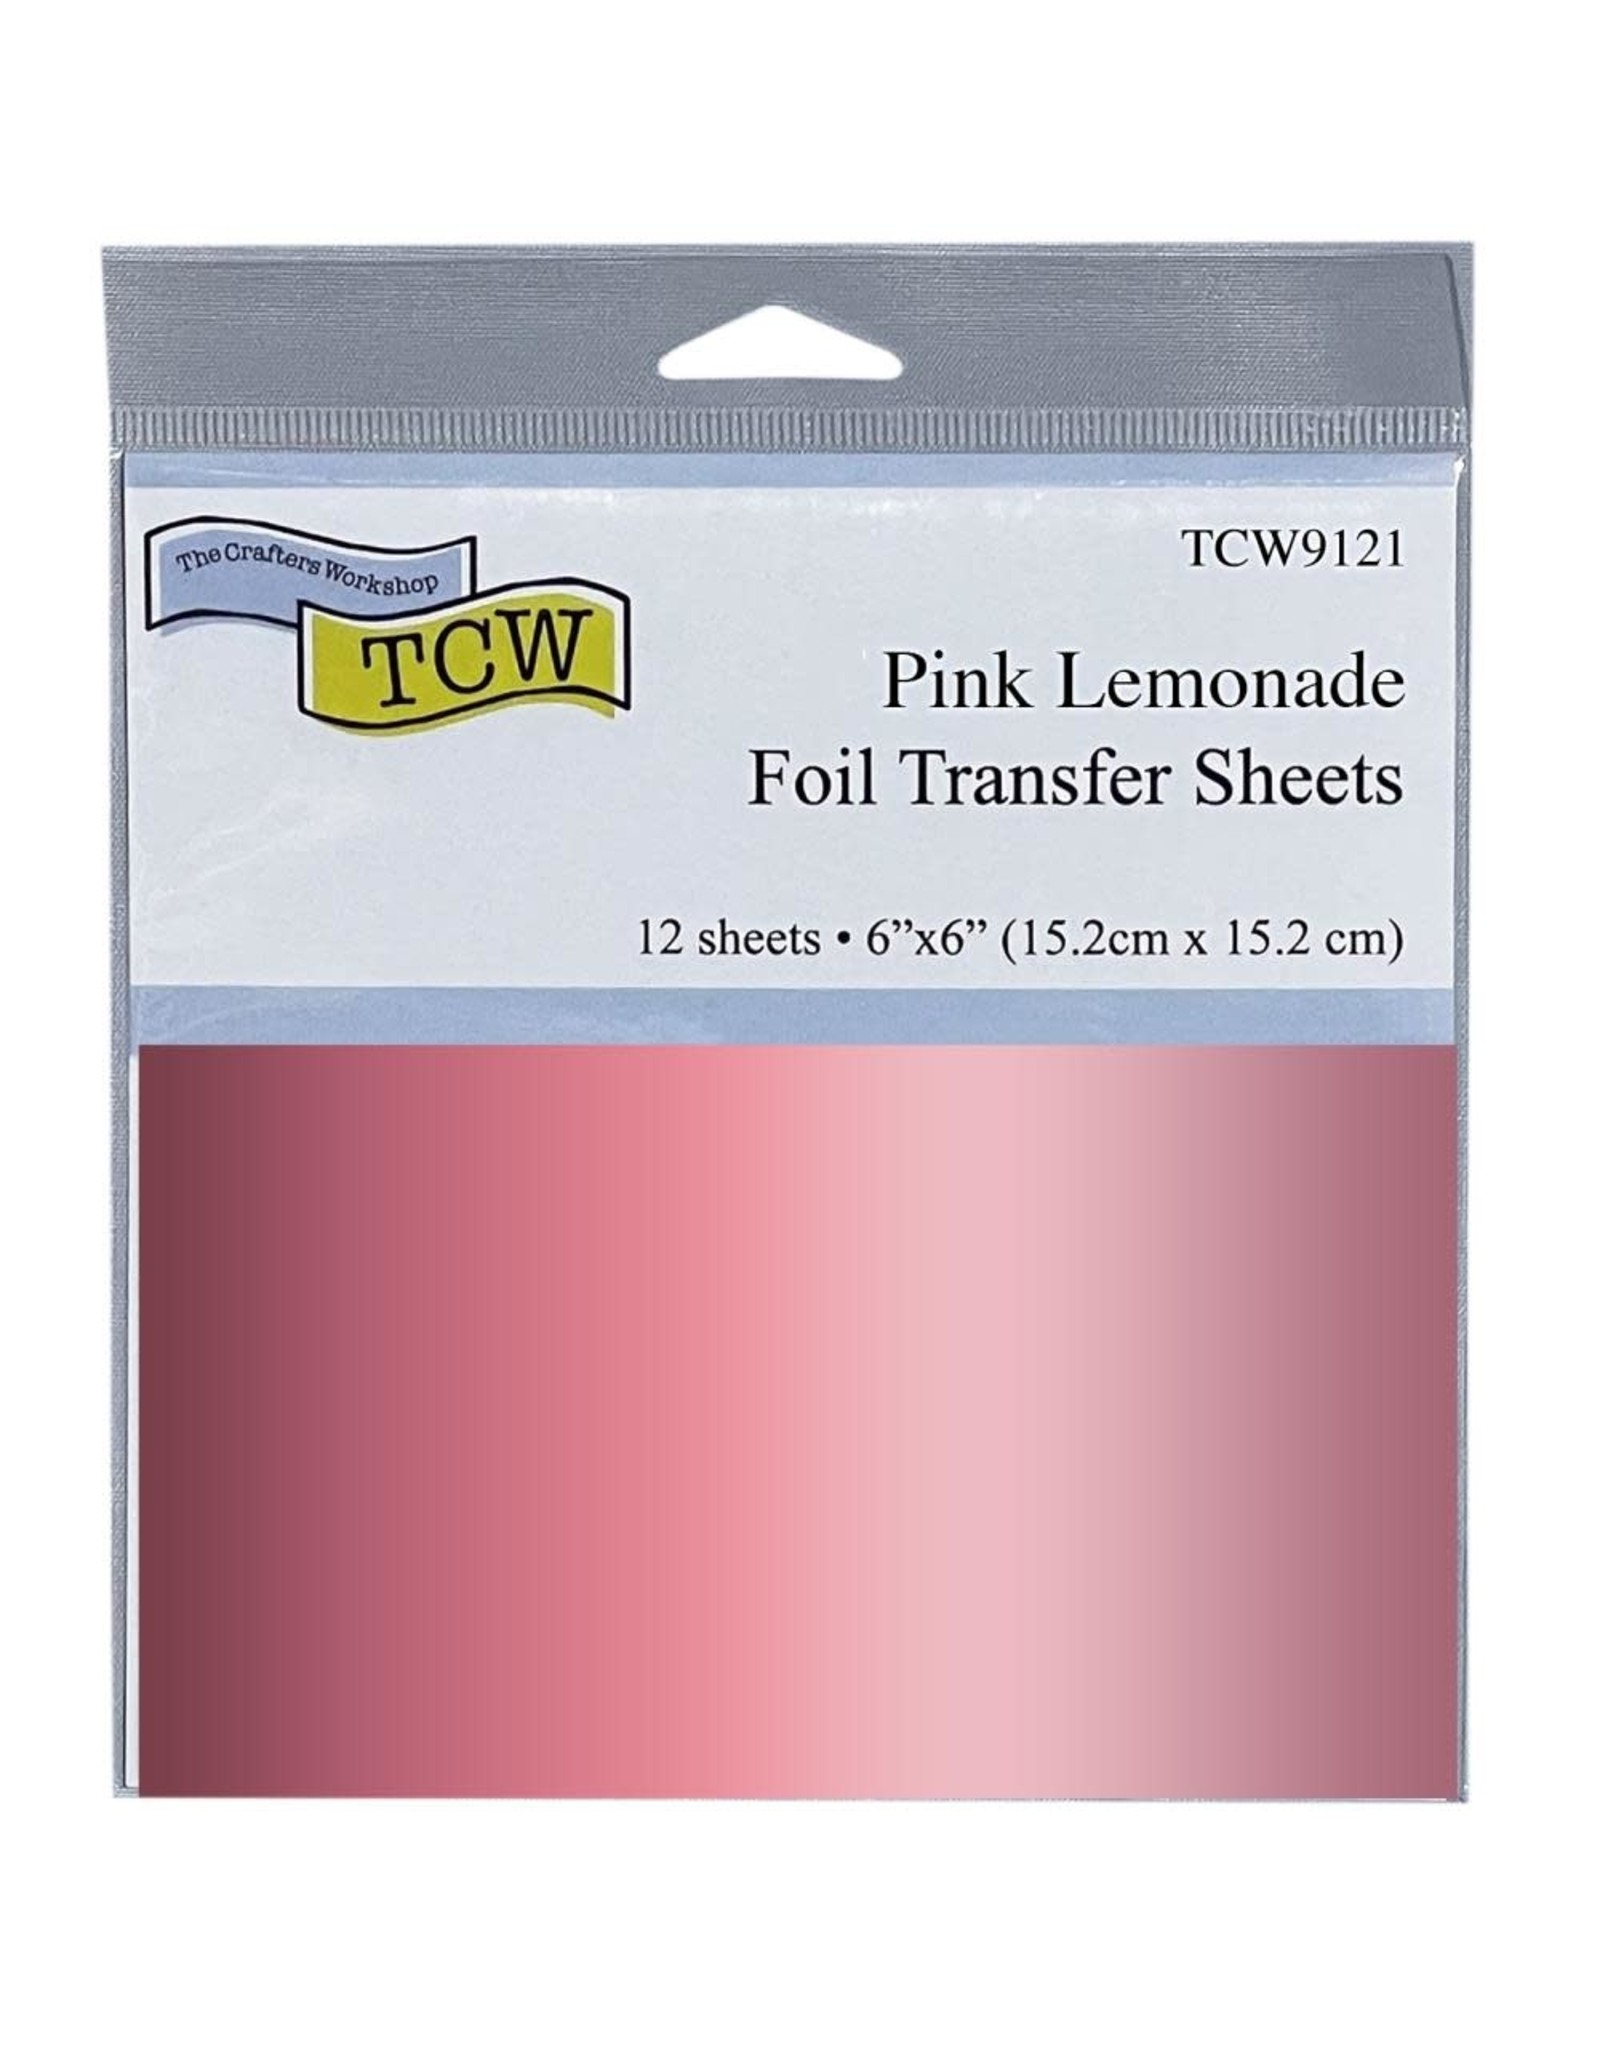 THERMOWEB THE CRAFTER'S WORKSHOP PINK LEMONADE 6x6 FOIL TRANSFER SHEETS 12/PK